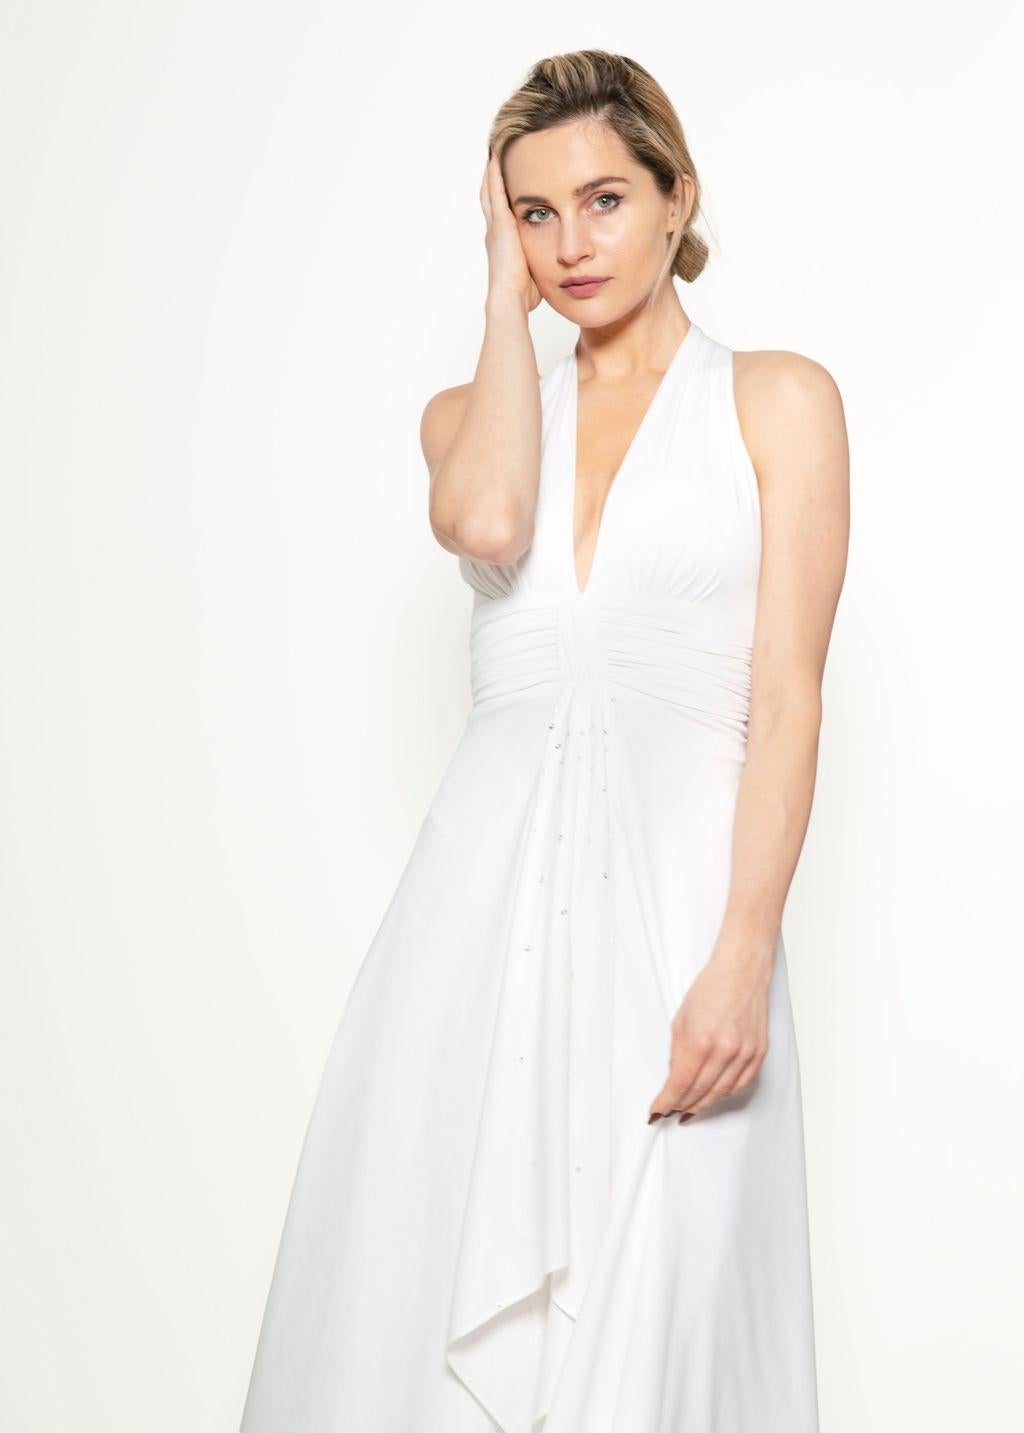 Get ready for your Marilyn Monroe moment! This elegant White 1970's Halter Dress is perfect for a bride to be or anyone looking for a striking and classic gown!

The dress features a deep v-neck neckline and a zipper in the back. Delicate sequin